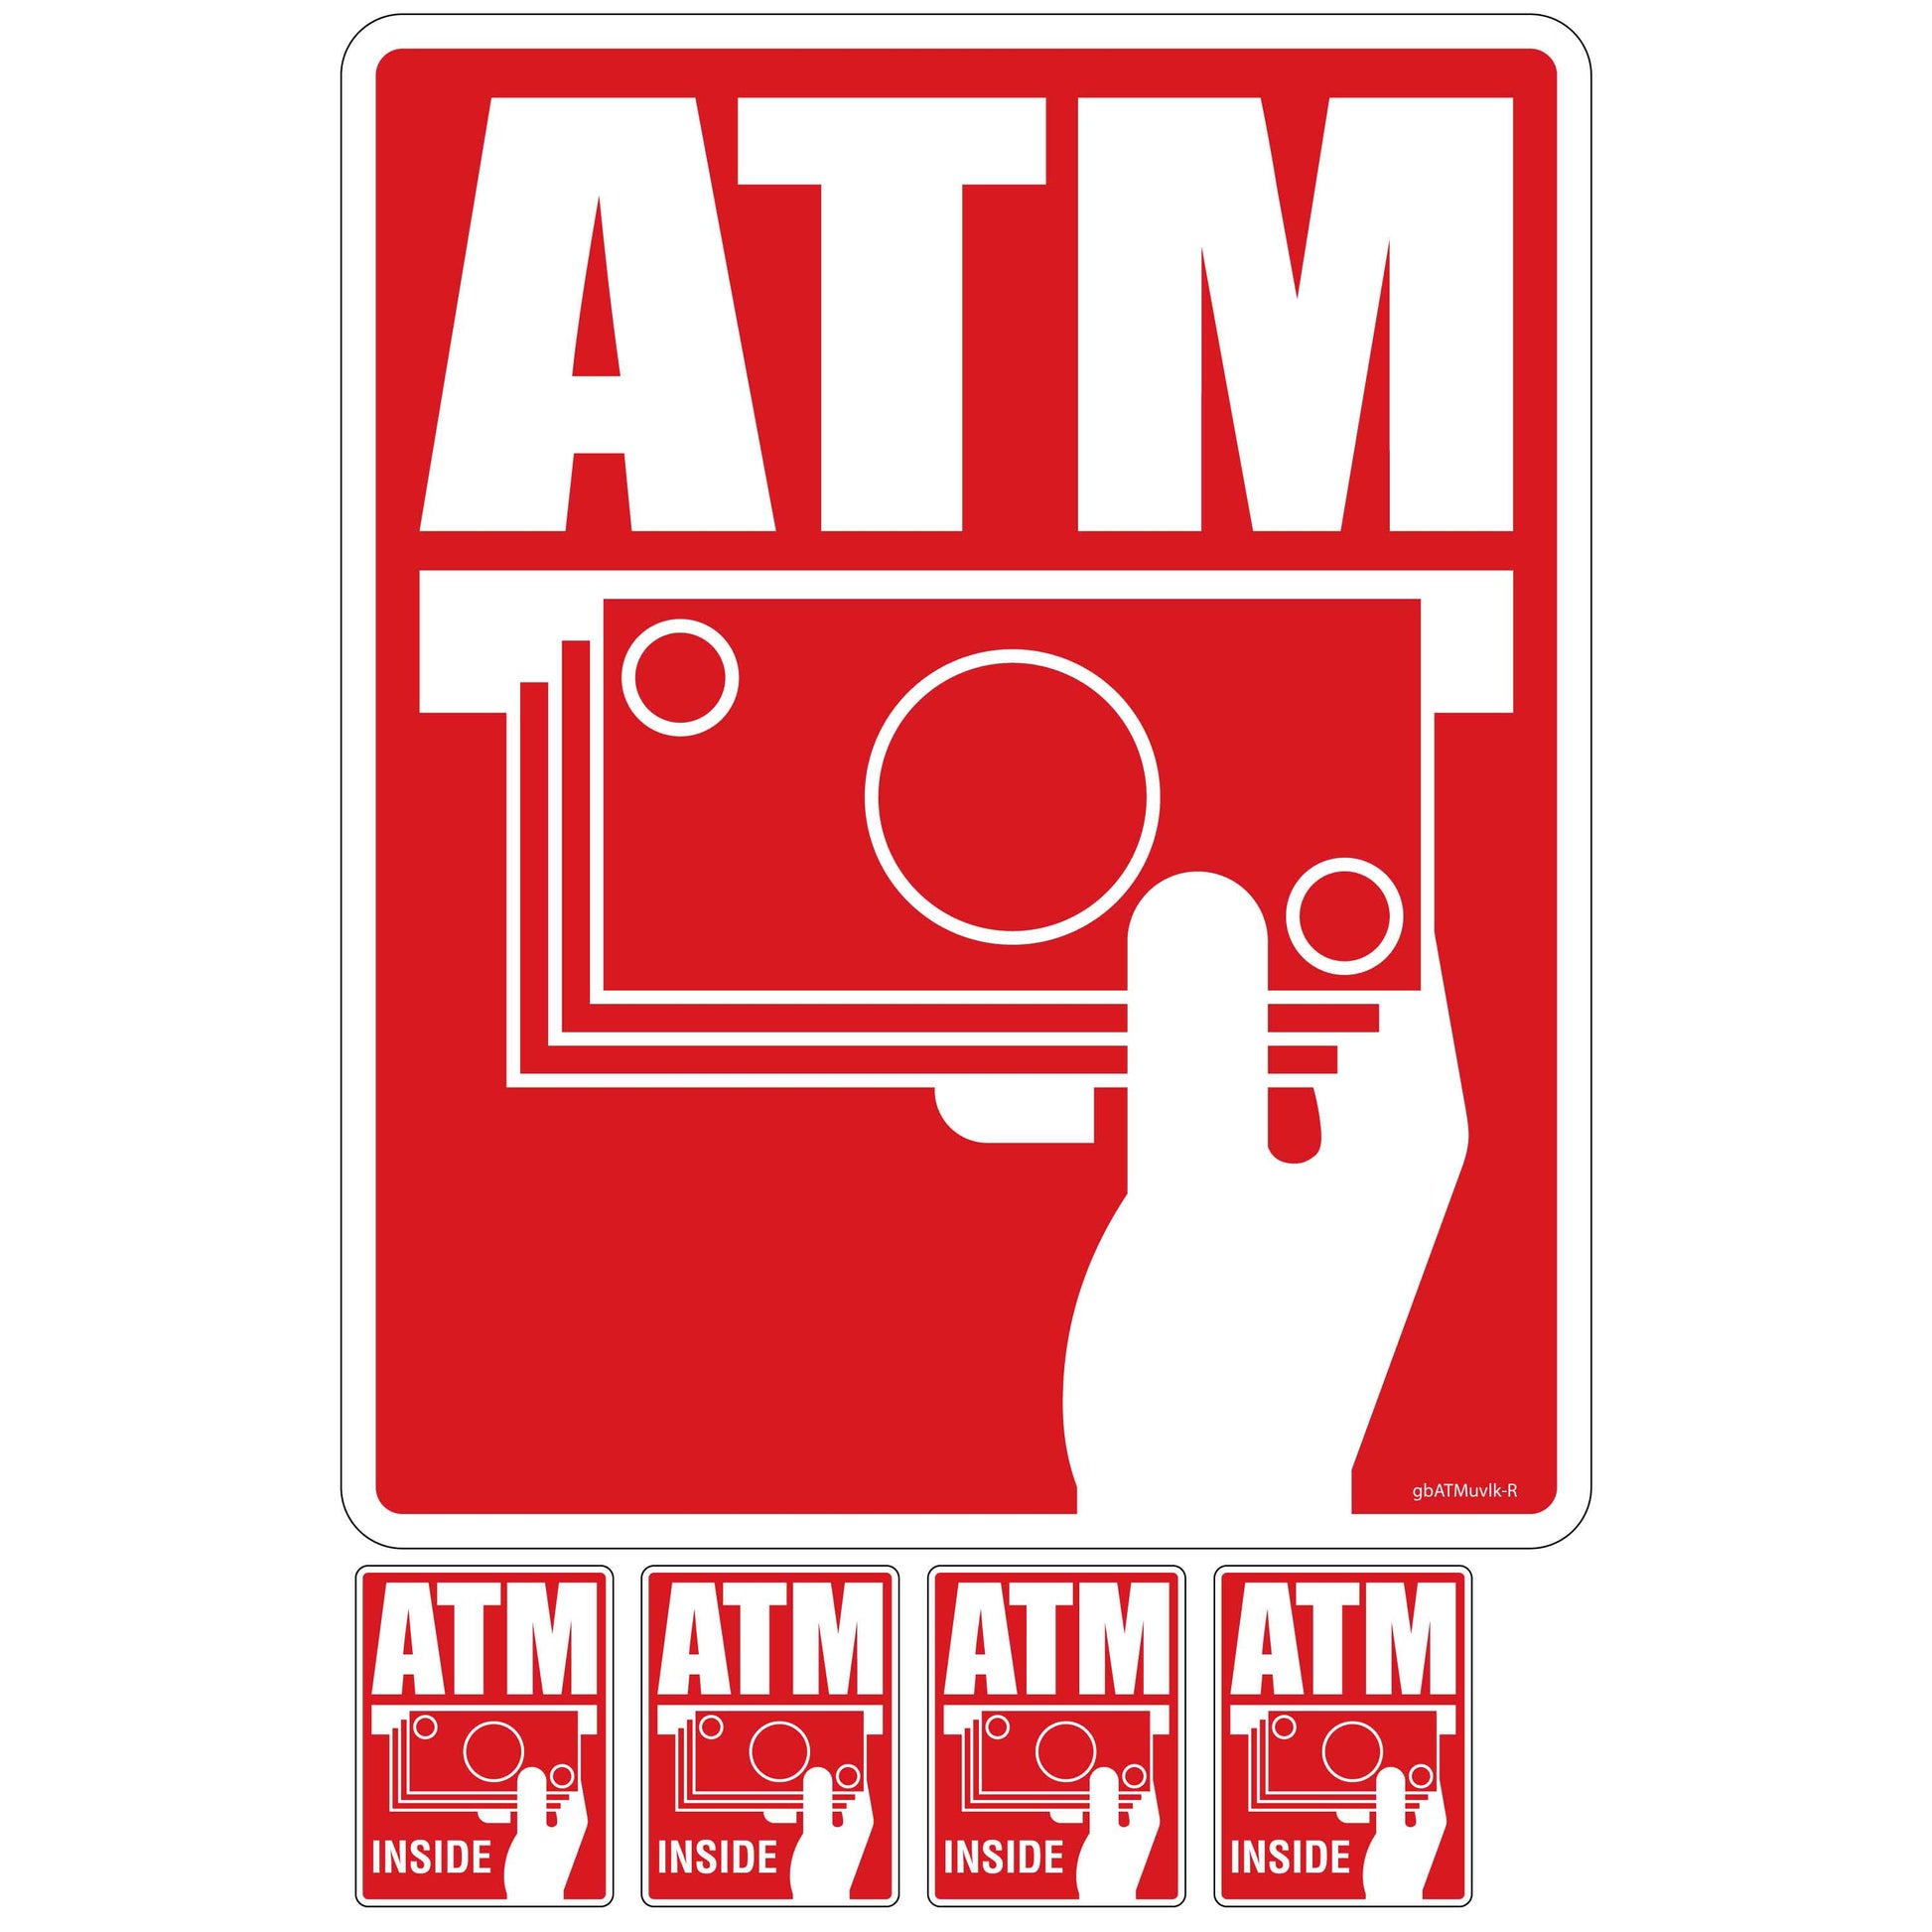 Red SharkSkin Universal ATM Decal Kit. Includes 3 decals sized 11 inches by 13.5 inches and 12 decals size at 2 inches by 3 inches.